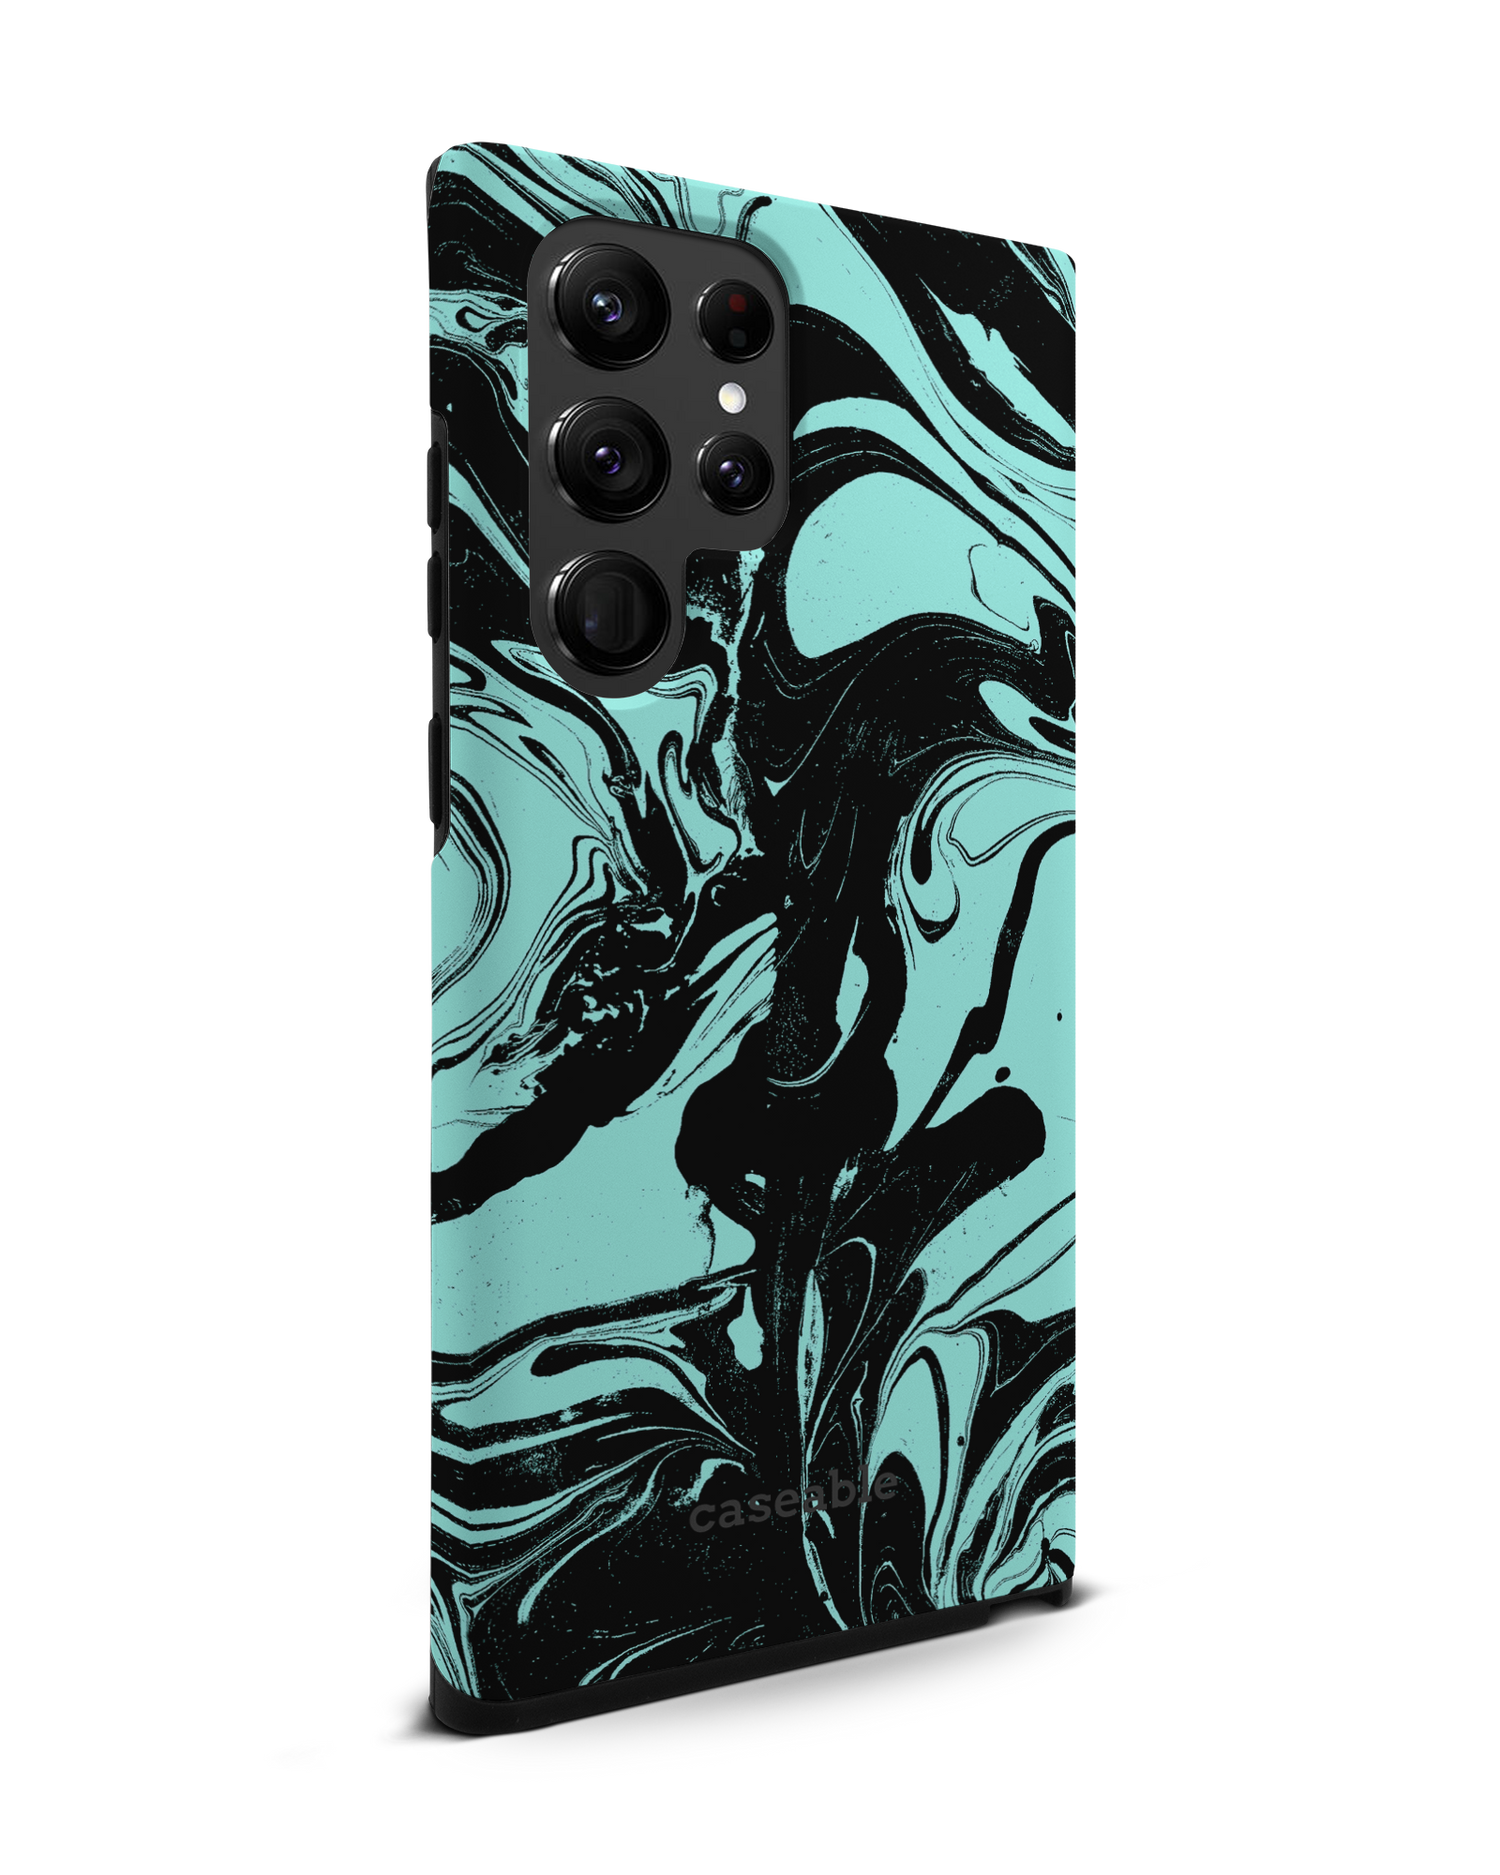 Mint Swirl Premium Phone Case Samsung Galaxy S22 Ultra 5G: View from the left side